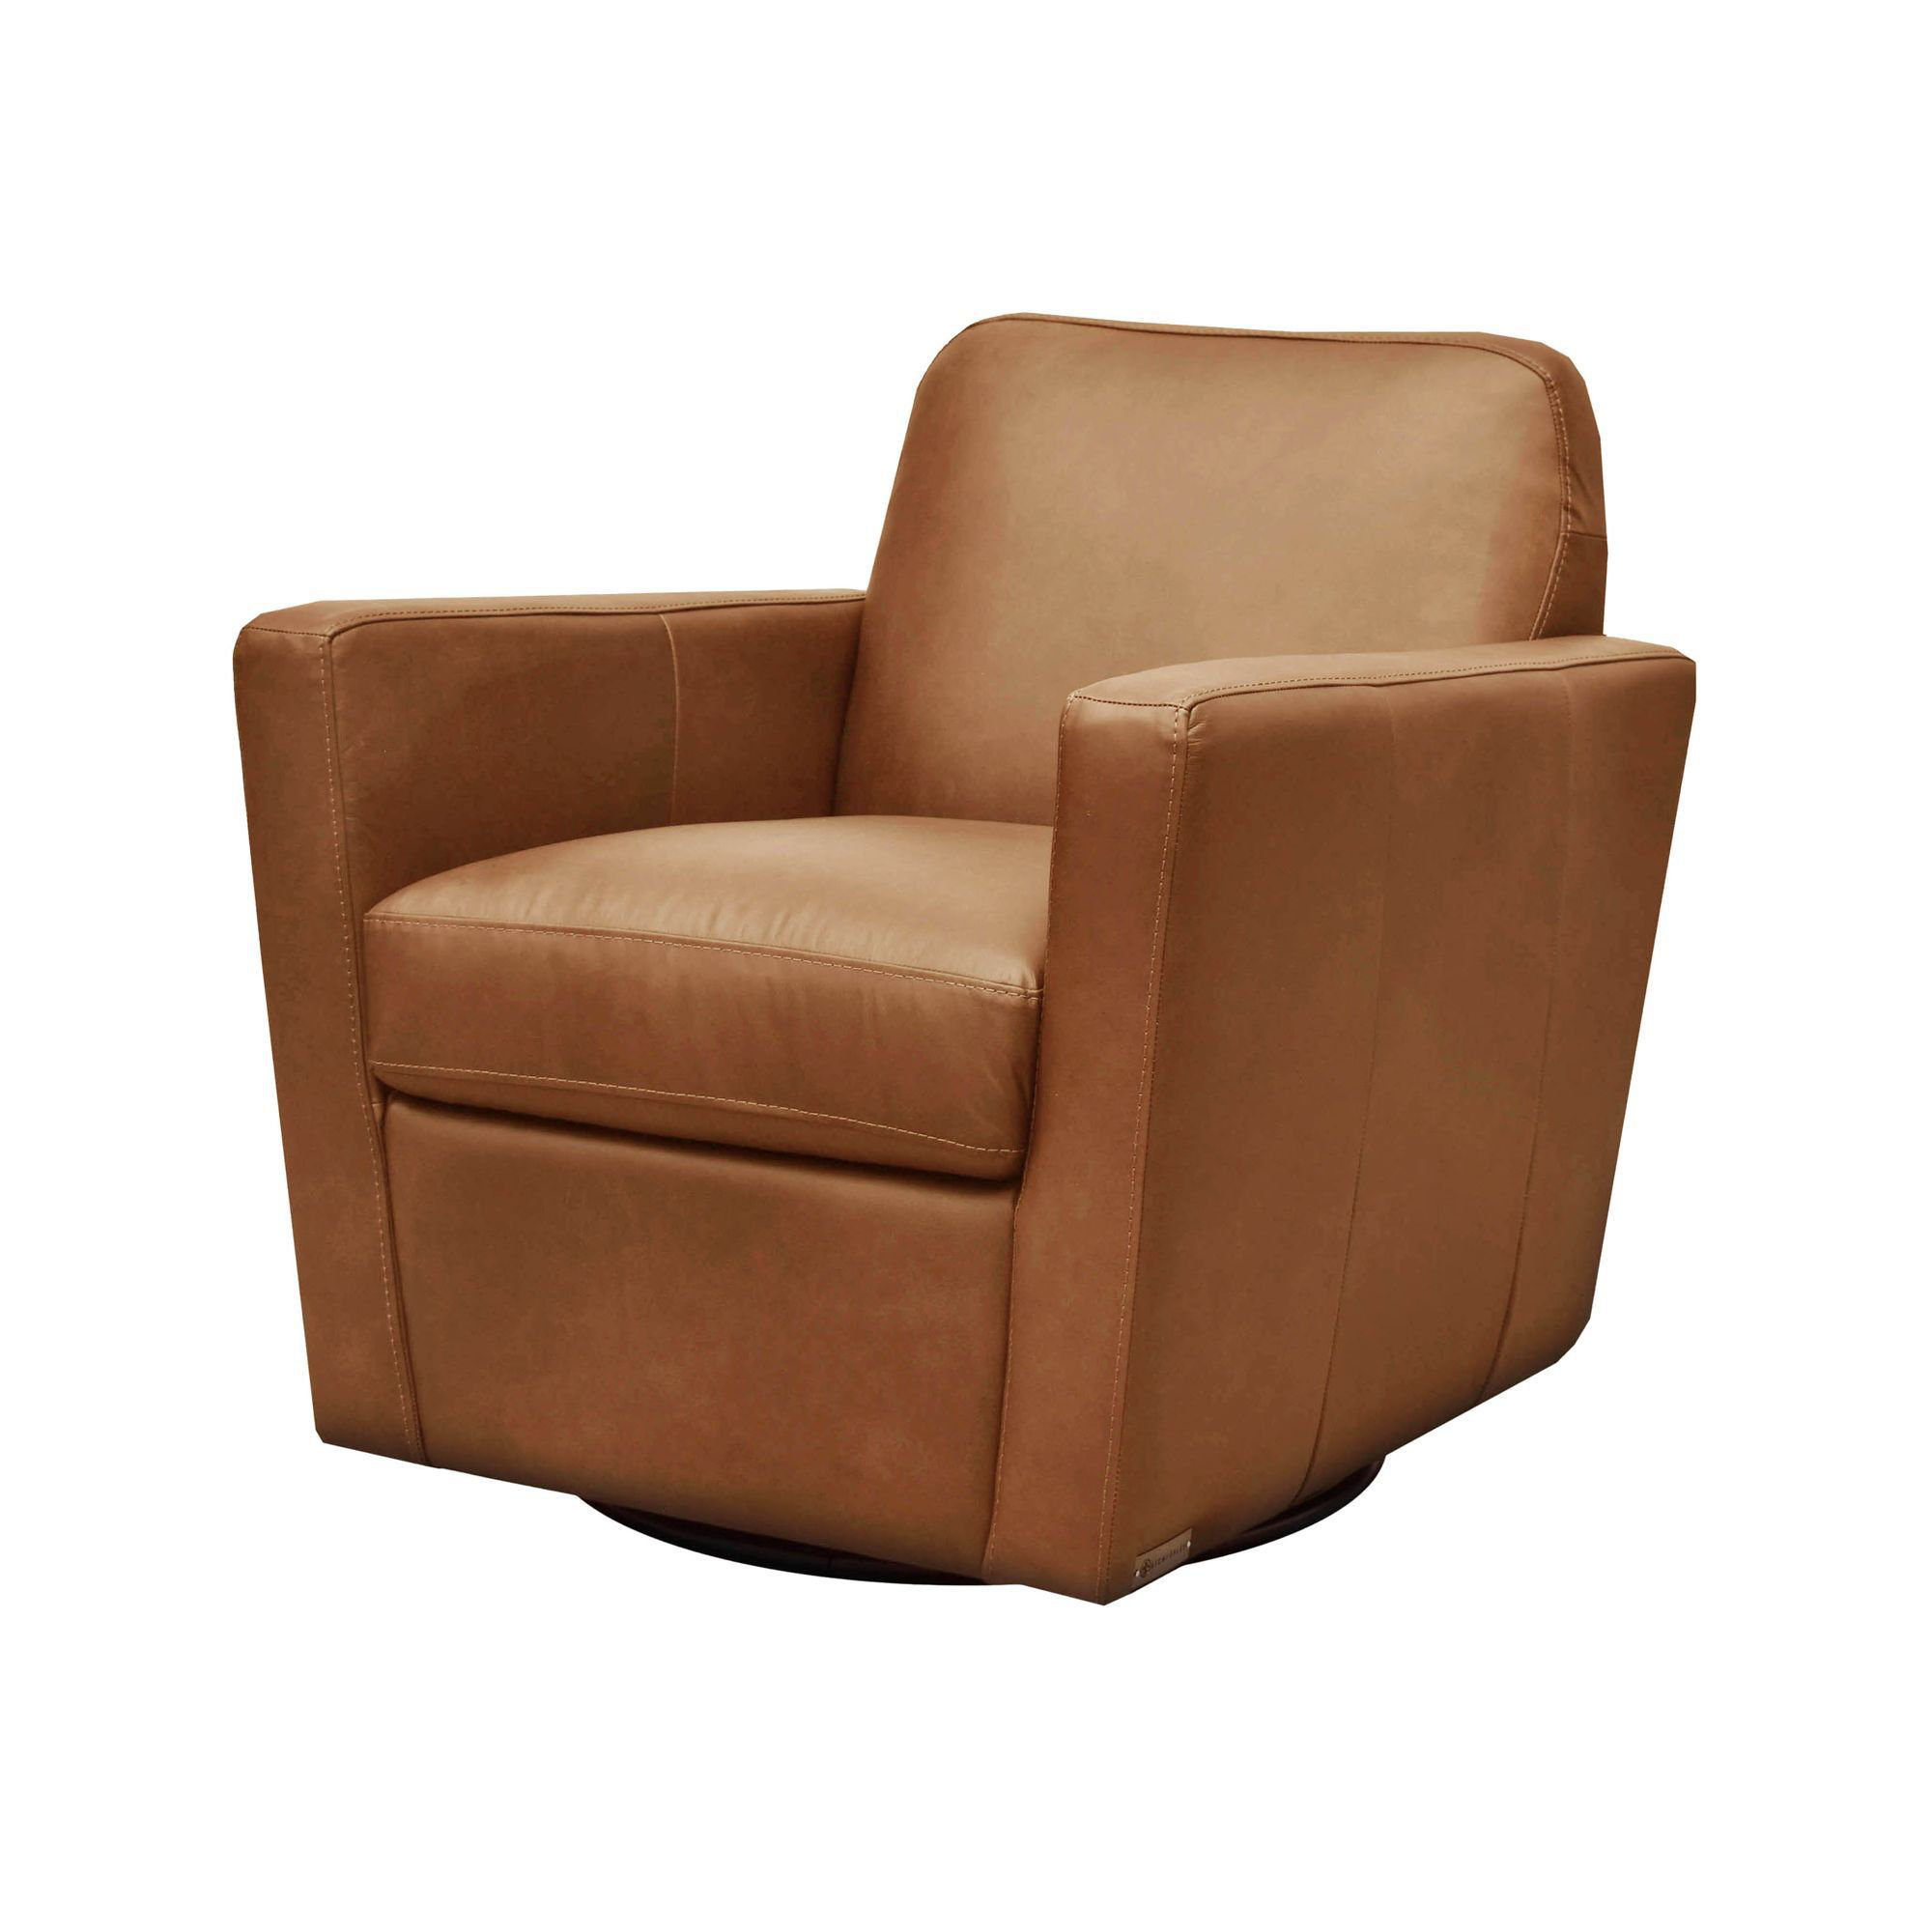 Eclectic Home Monty Leather | Club Wayfair Chair Swivel